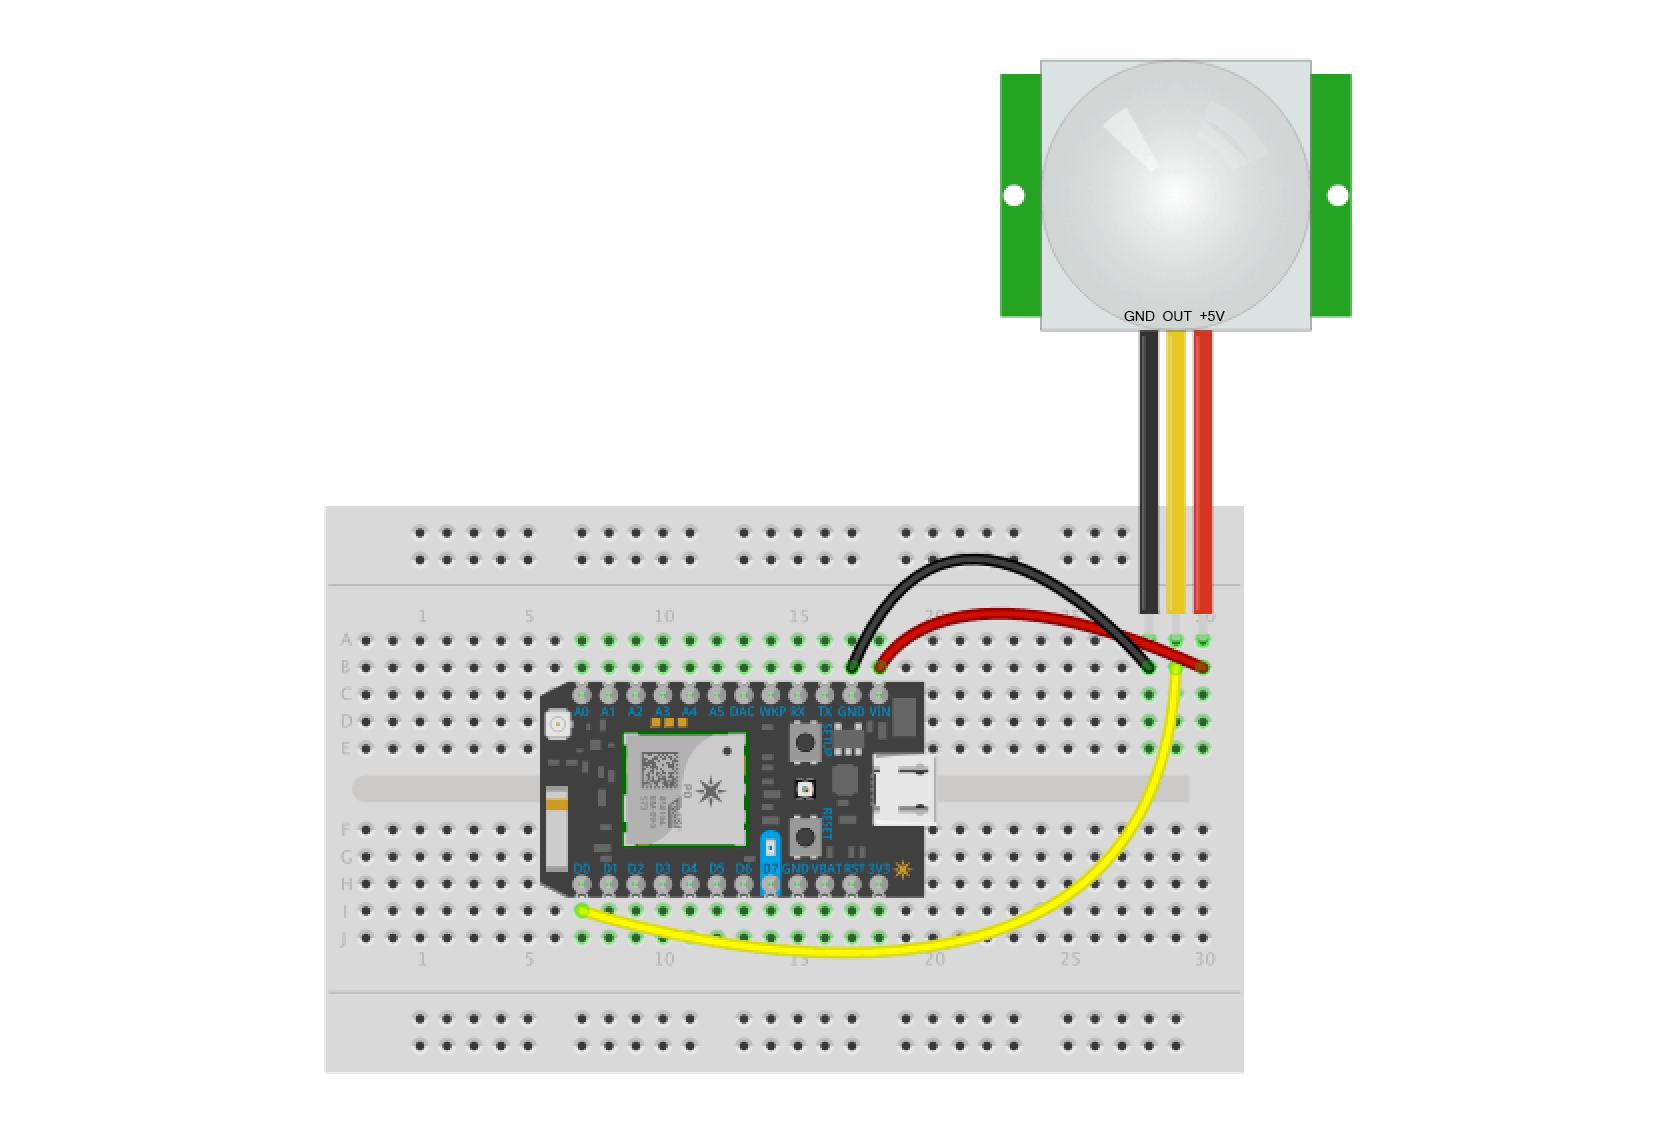 Connecting a PIR sensor to a Particle Photon